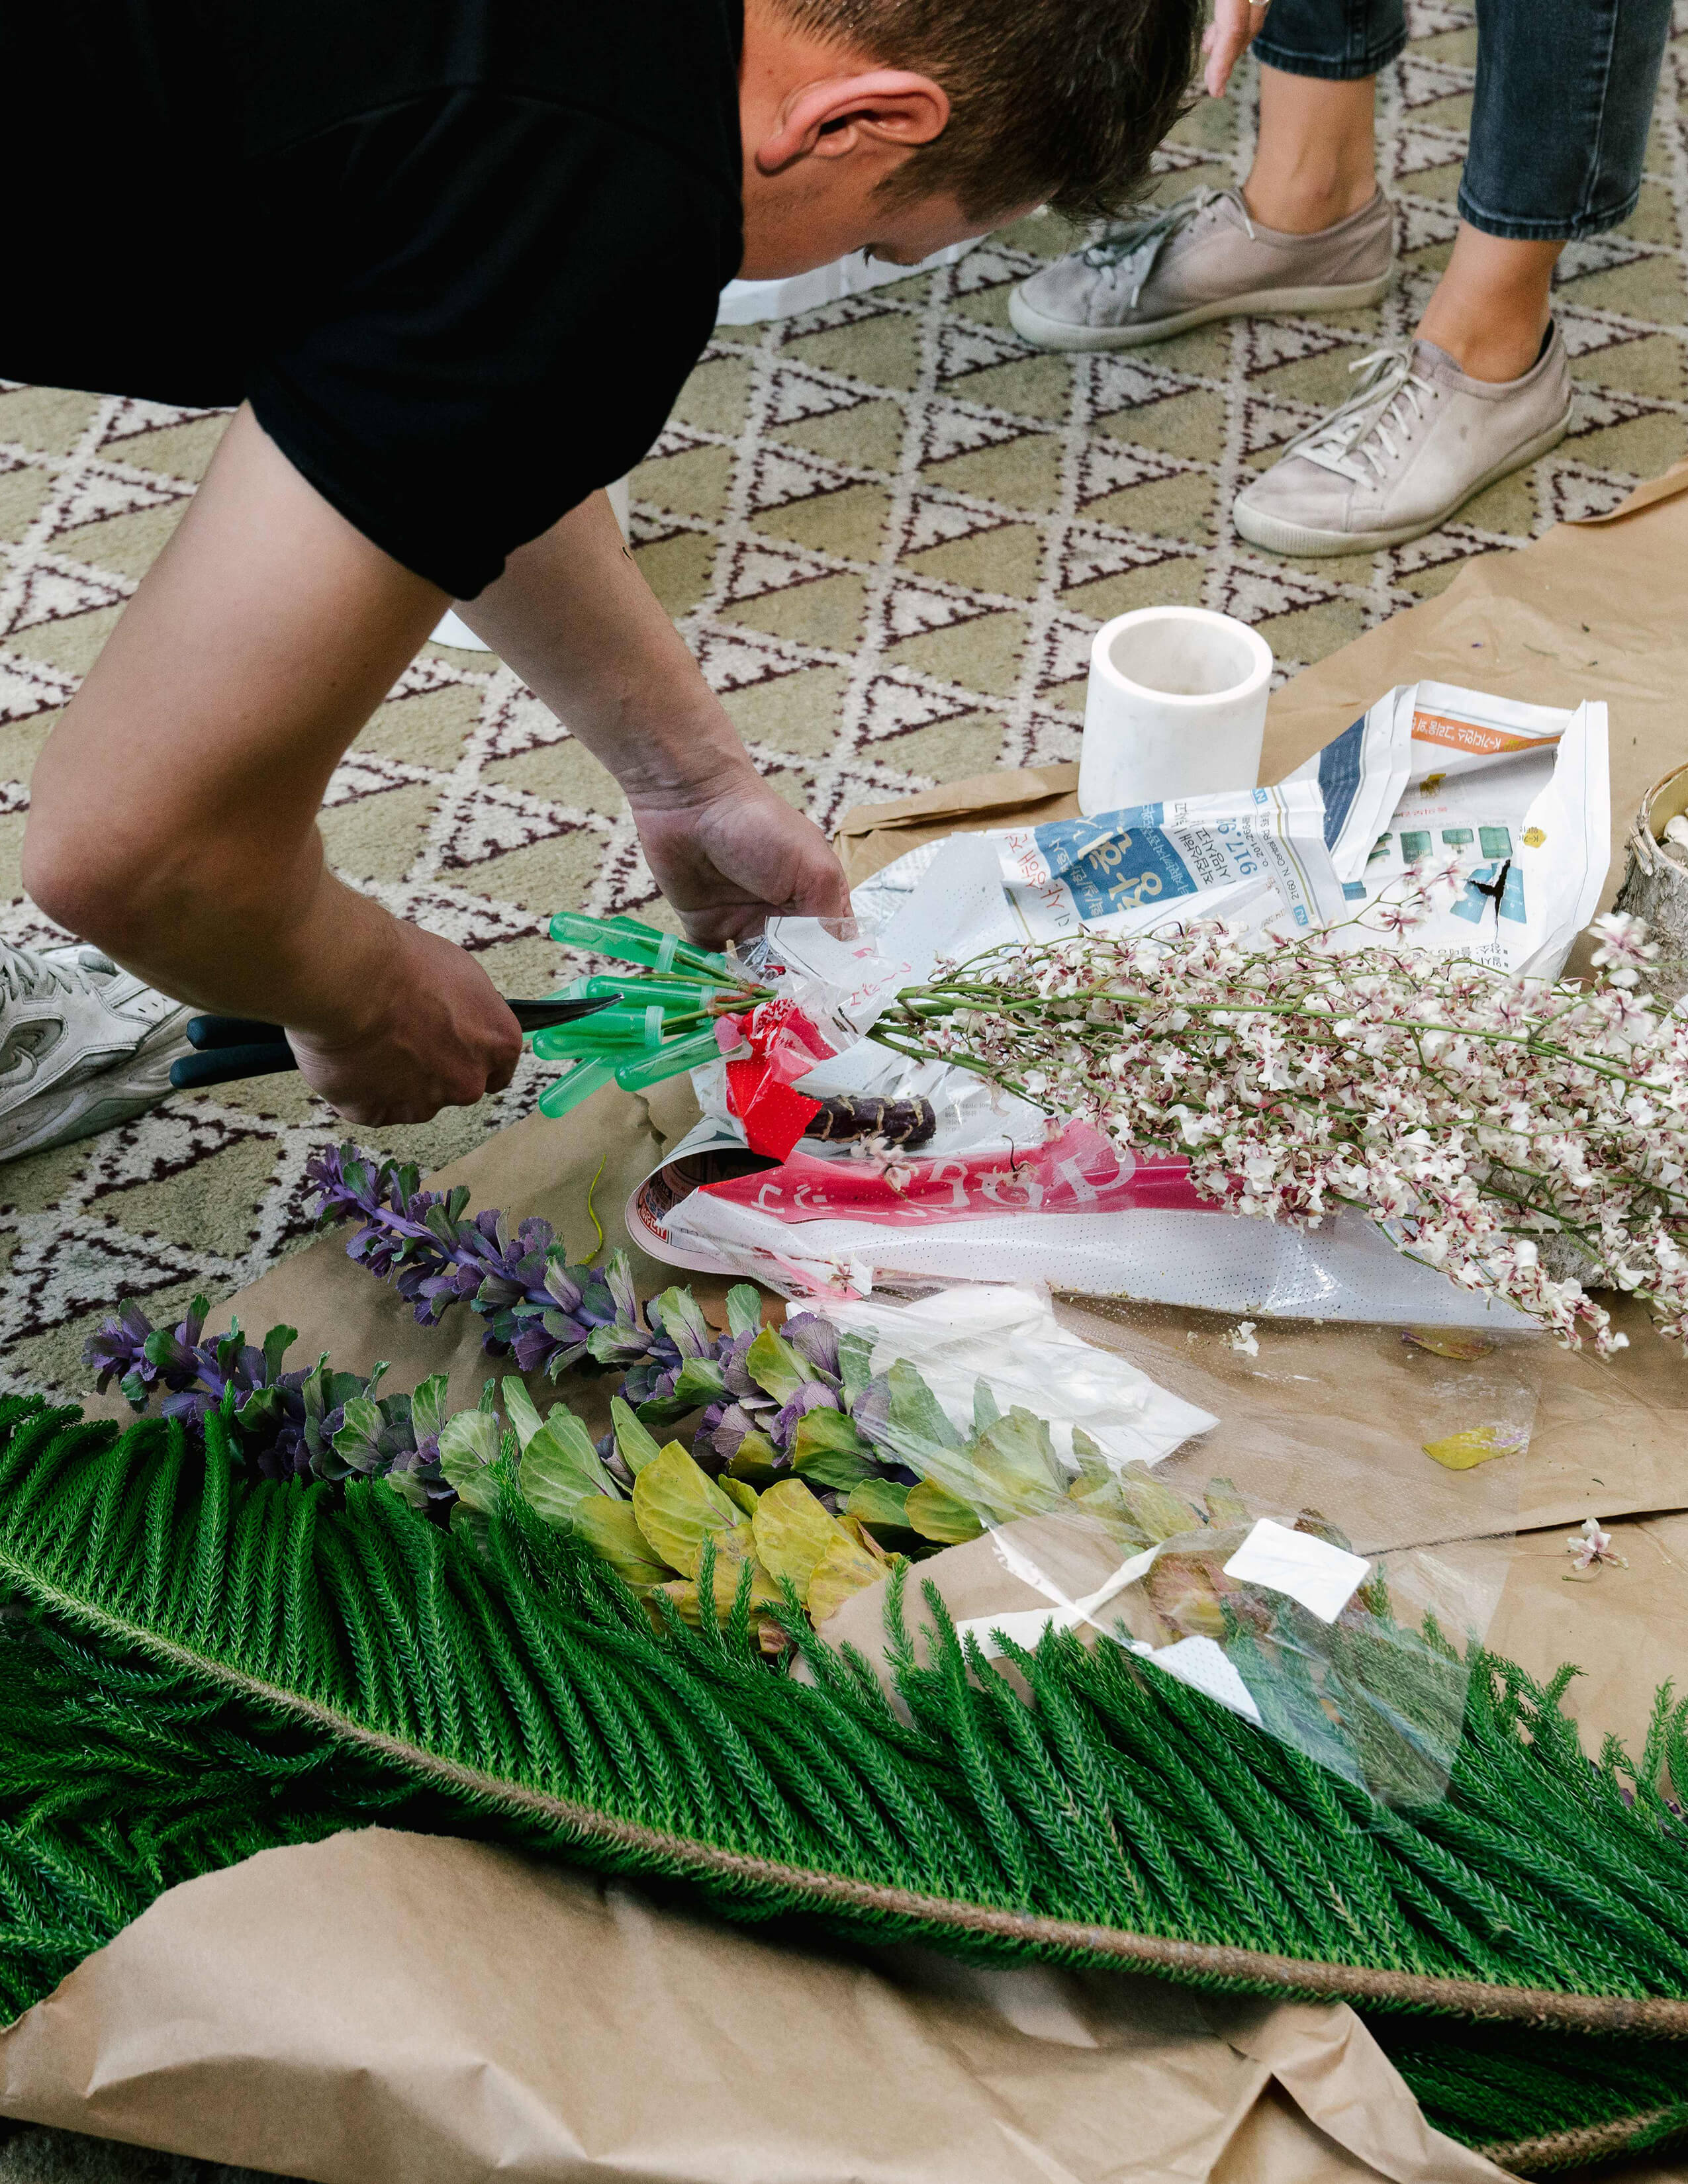 A person bends down his waist with secateurs in his hand and approaches a bundle of flowers on the floor while there are other kinds of plants and flowers lying around.